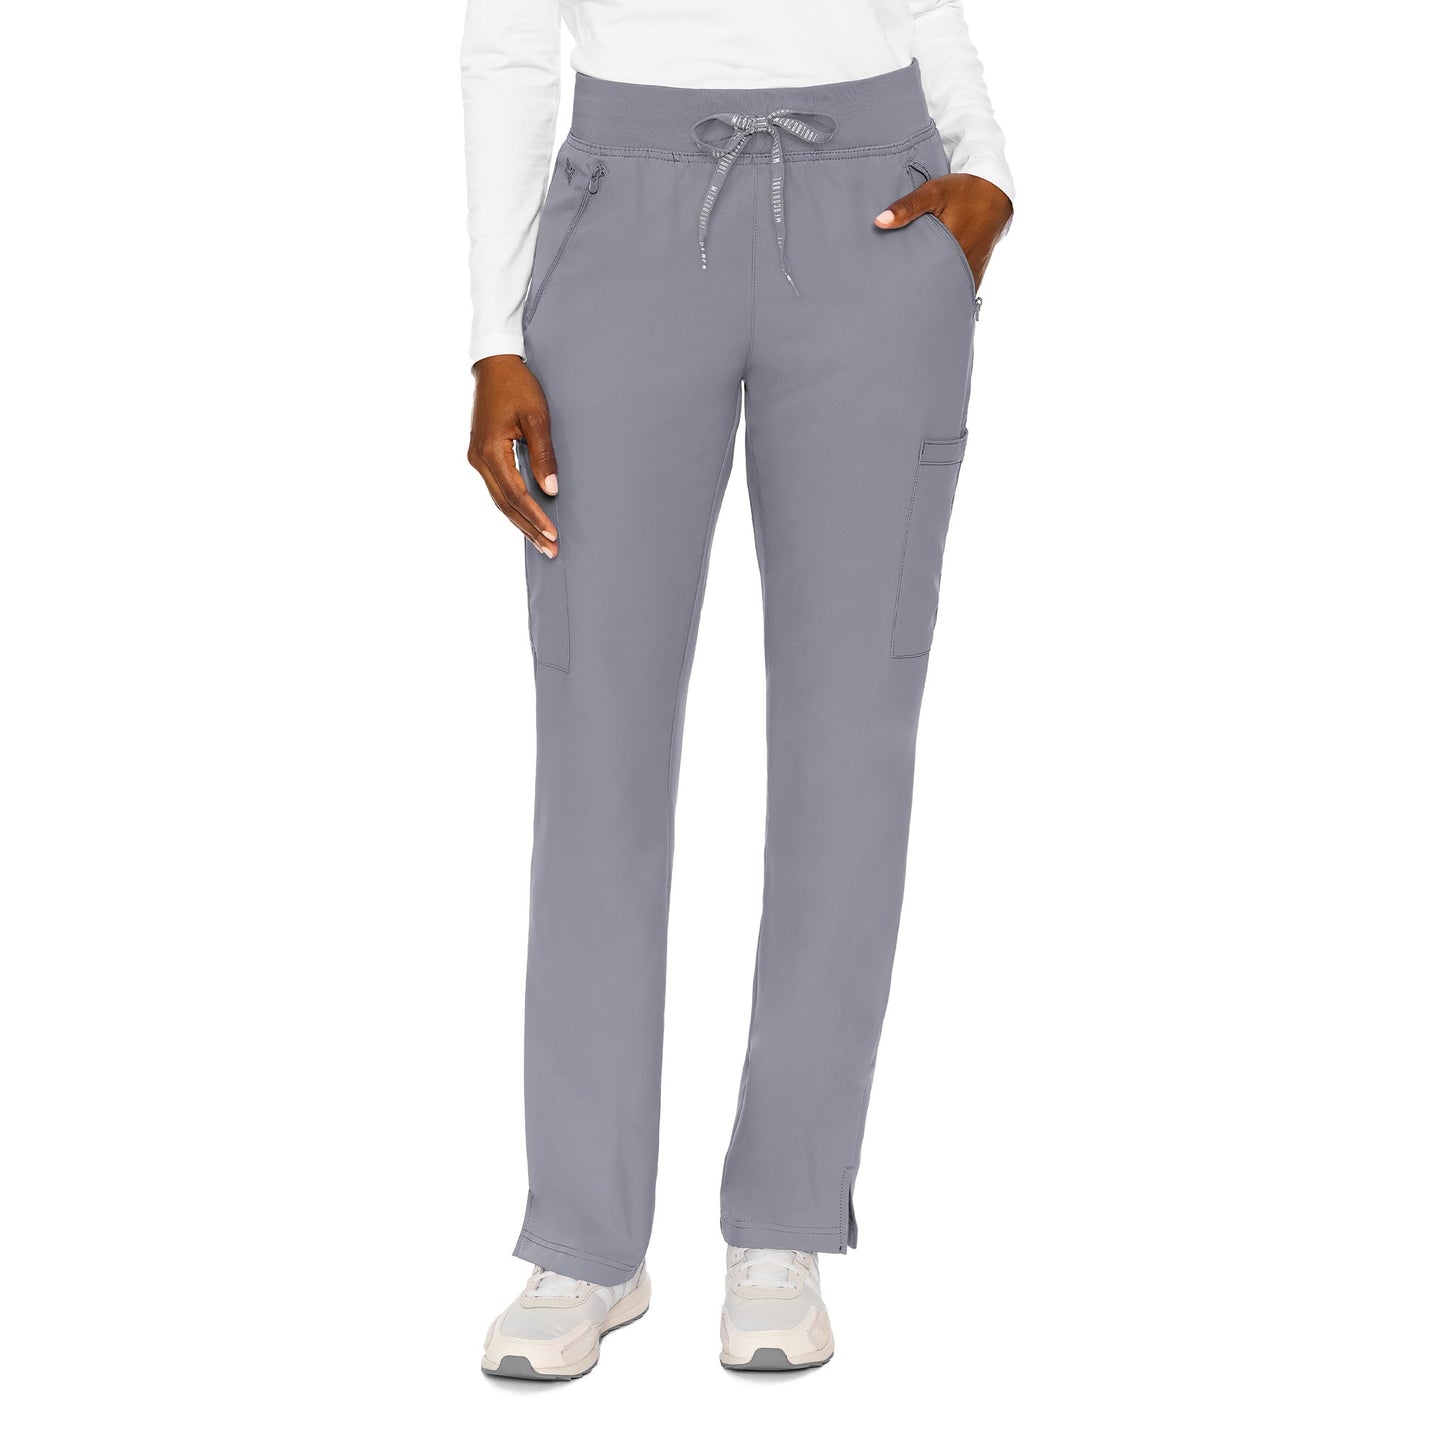 Med Couture Insight Zipper Pant Tall (16 colors in XS-XL)